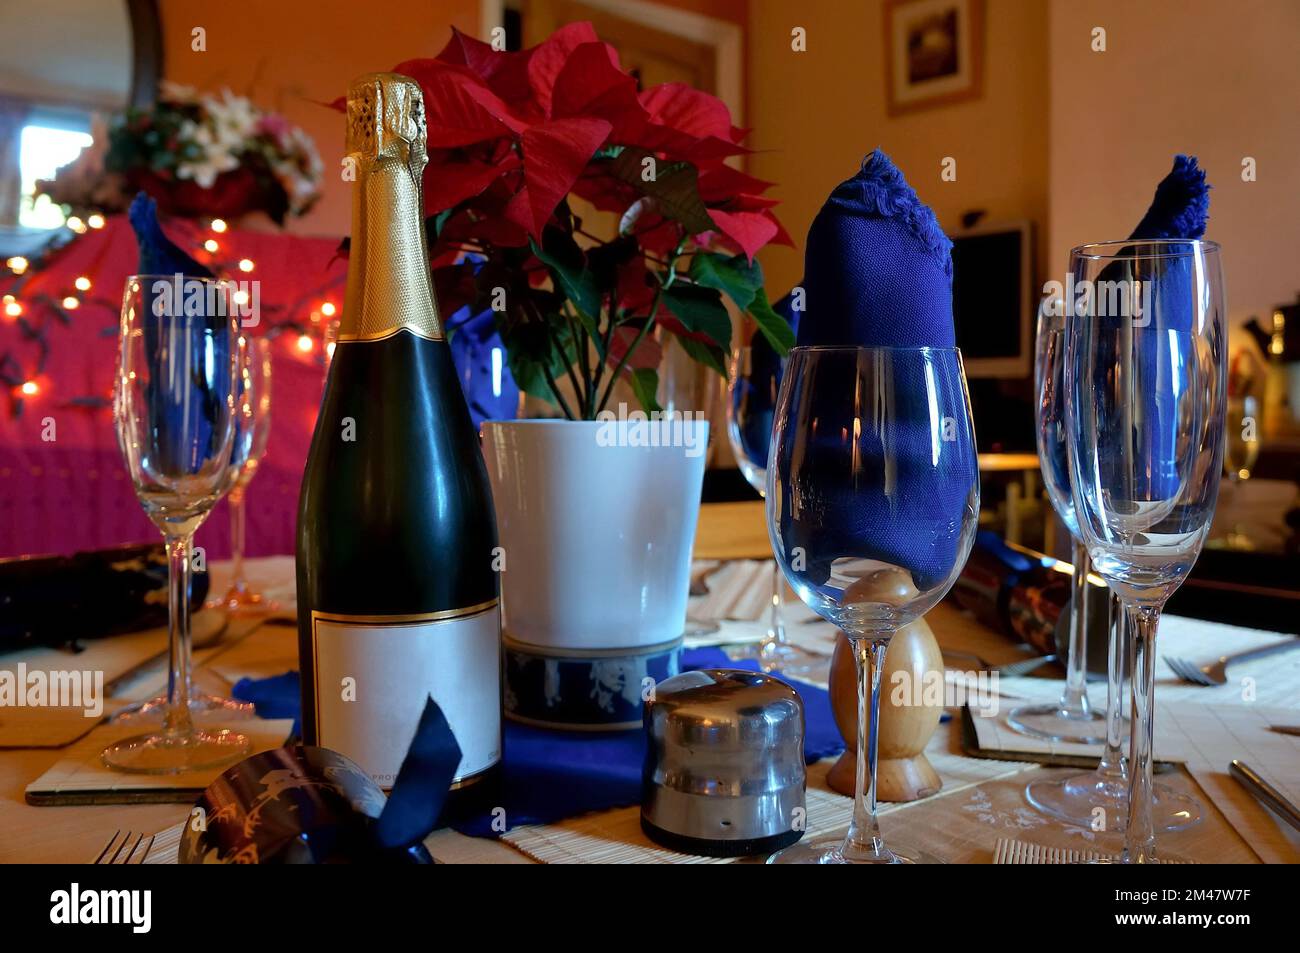 wine bottle with glasses and napkins set for a meal on the dining table for Christmas dinner Stock Photo